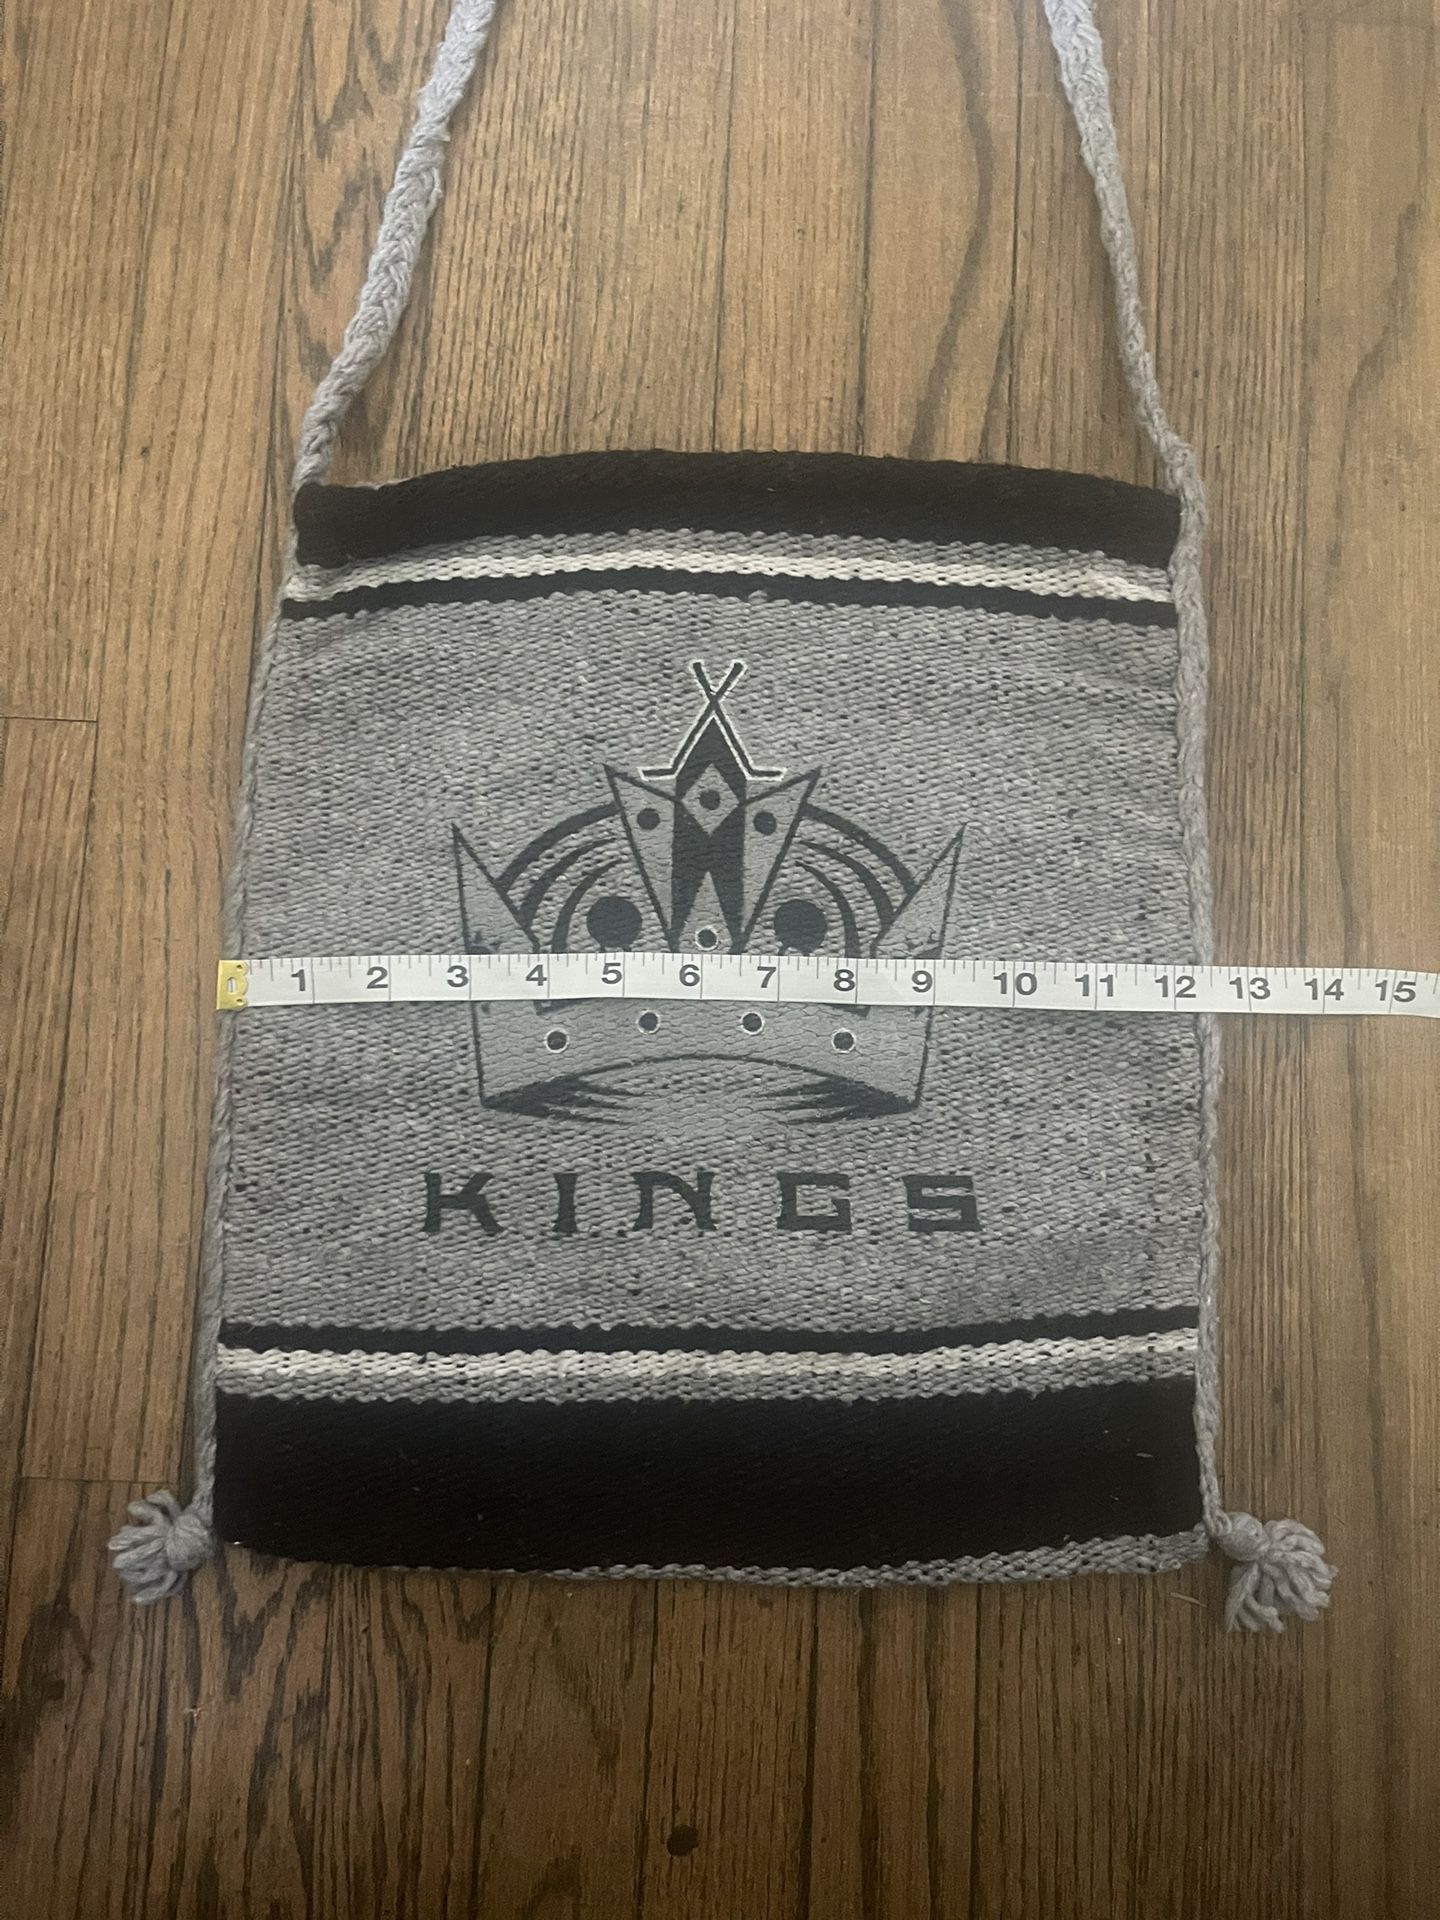 NEW LA Kings Tote Bag From Mexico - $10 (Firm) for Sale in Riverside, CA -  OfferUp